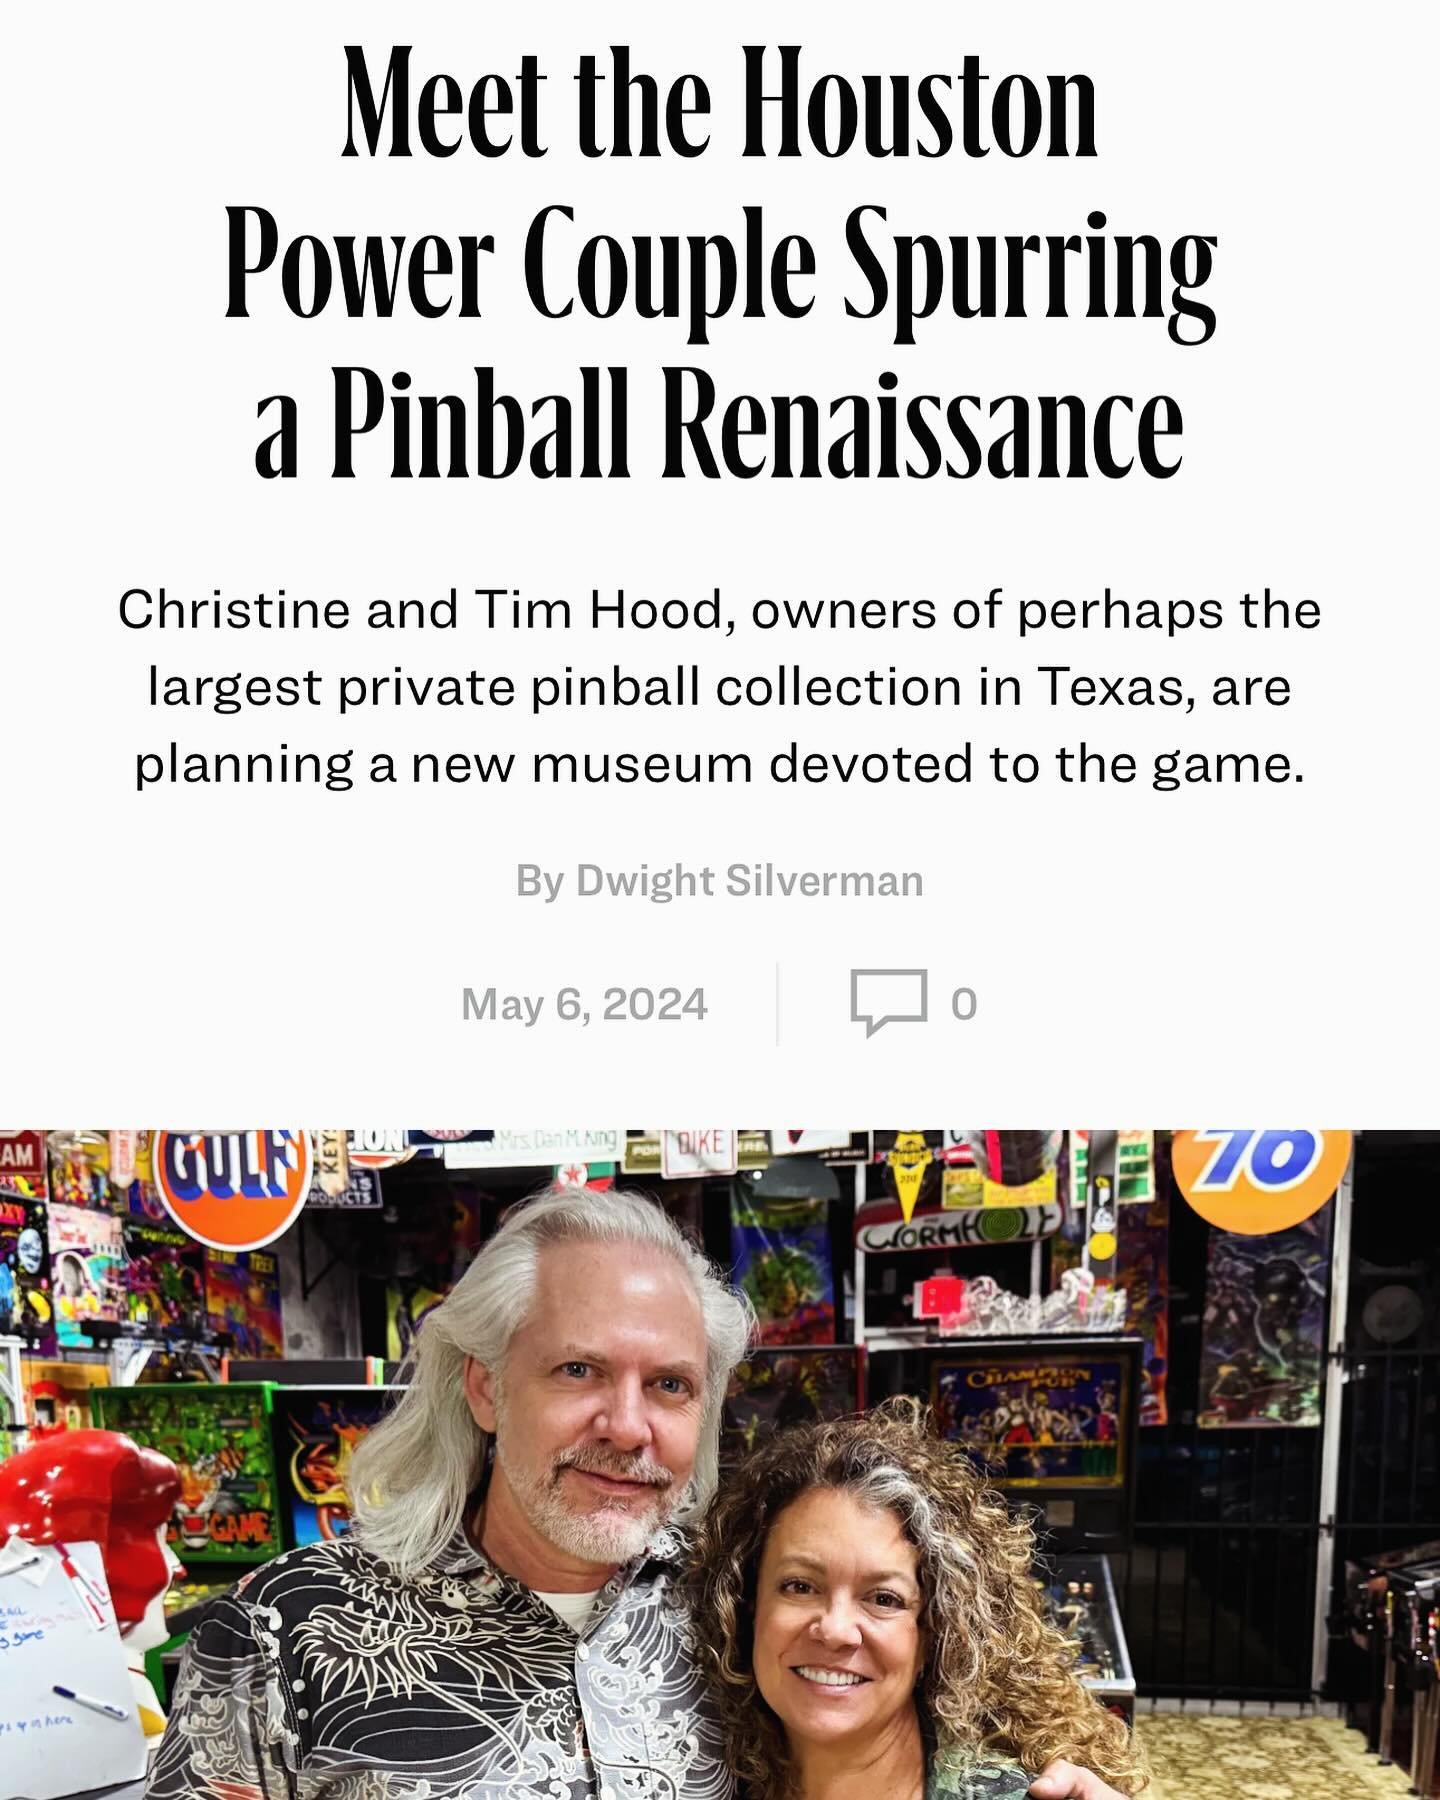 Be sure to check our latest article in @texasmonthly about the Hoods, Wormhole, and the future!!!
https://www.texasmonthly.com/arts-entertainment/underground-pinball-den-houston-museum/